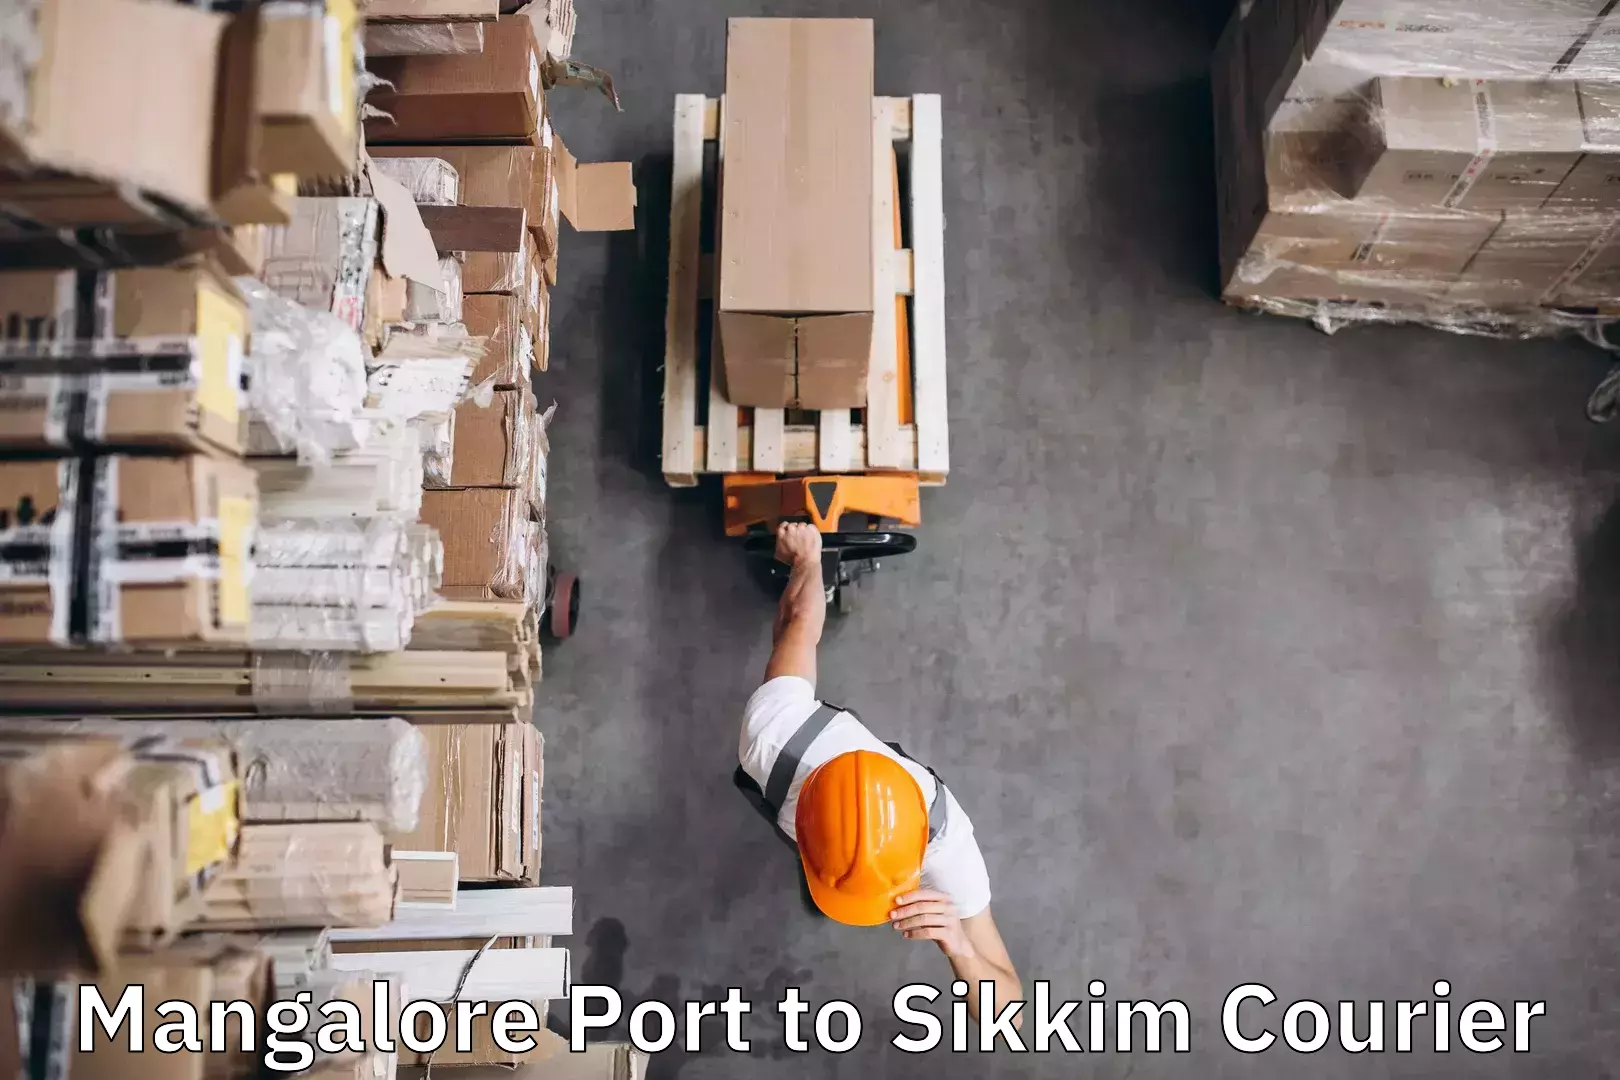 Luggage delivery network Mangalore Port to East Sikkim